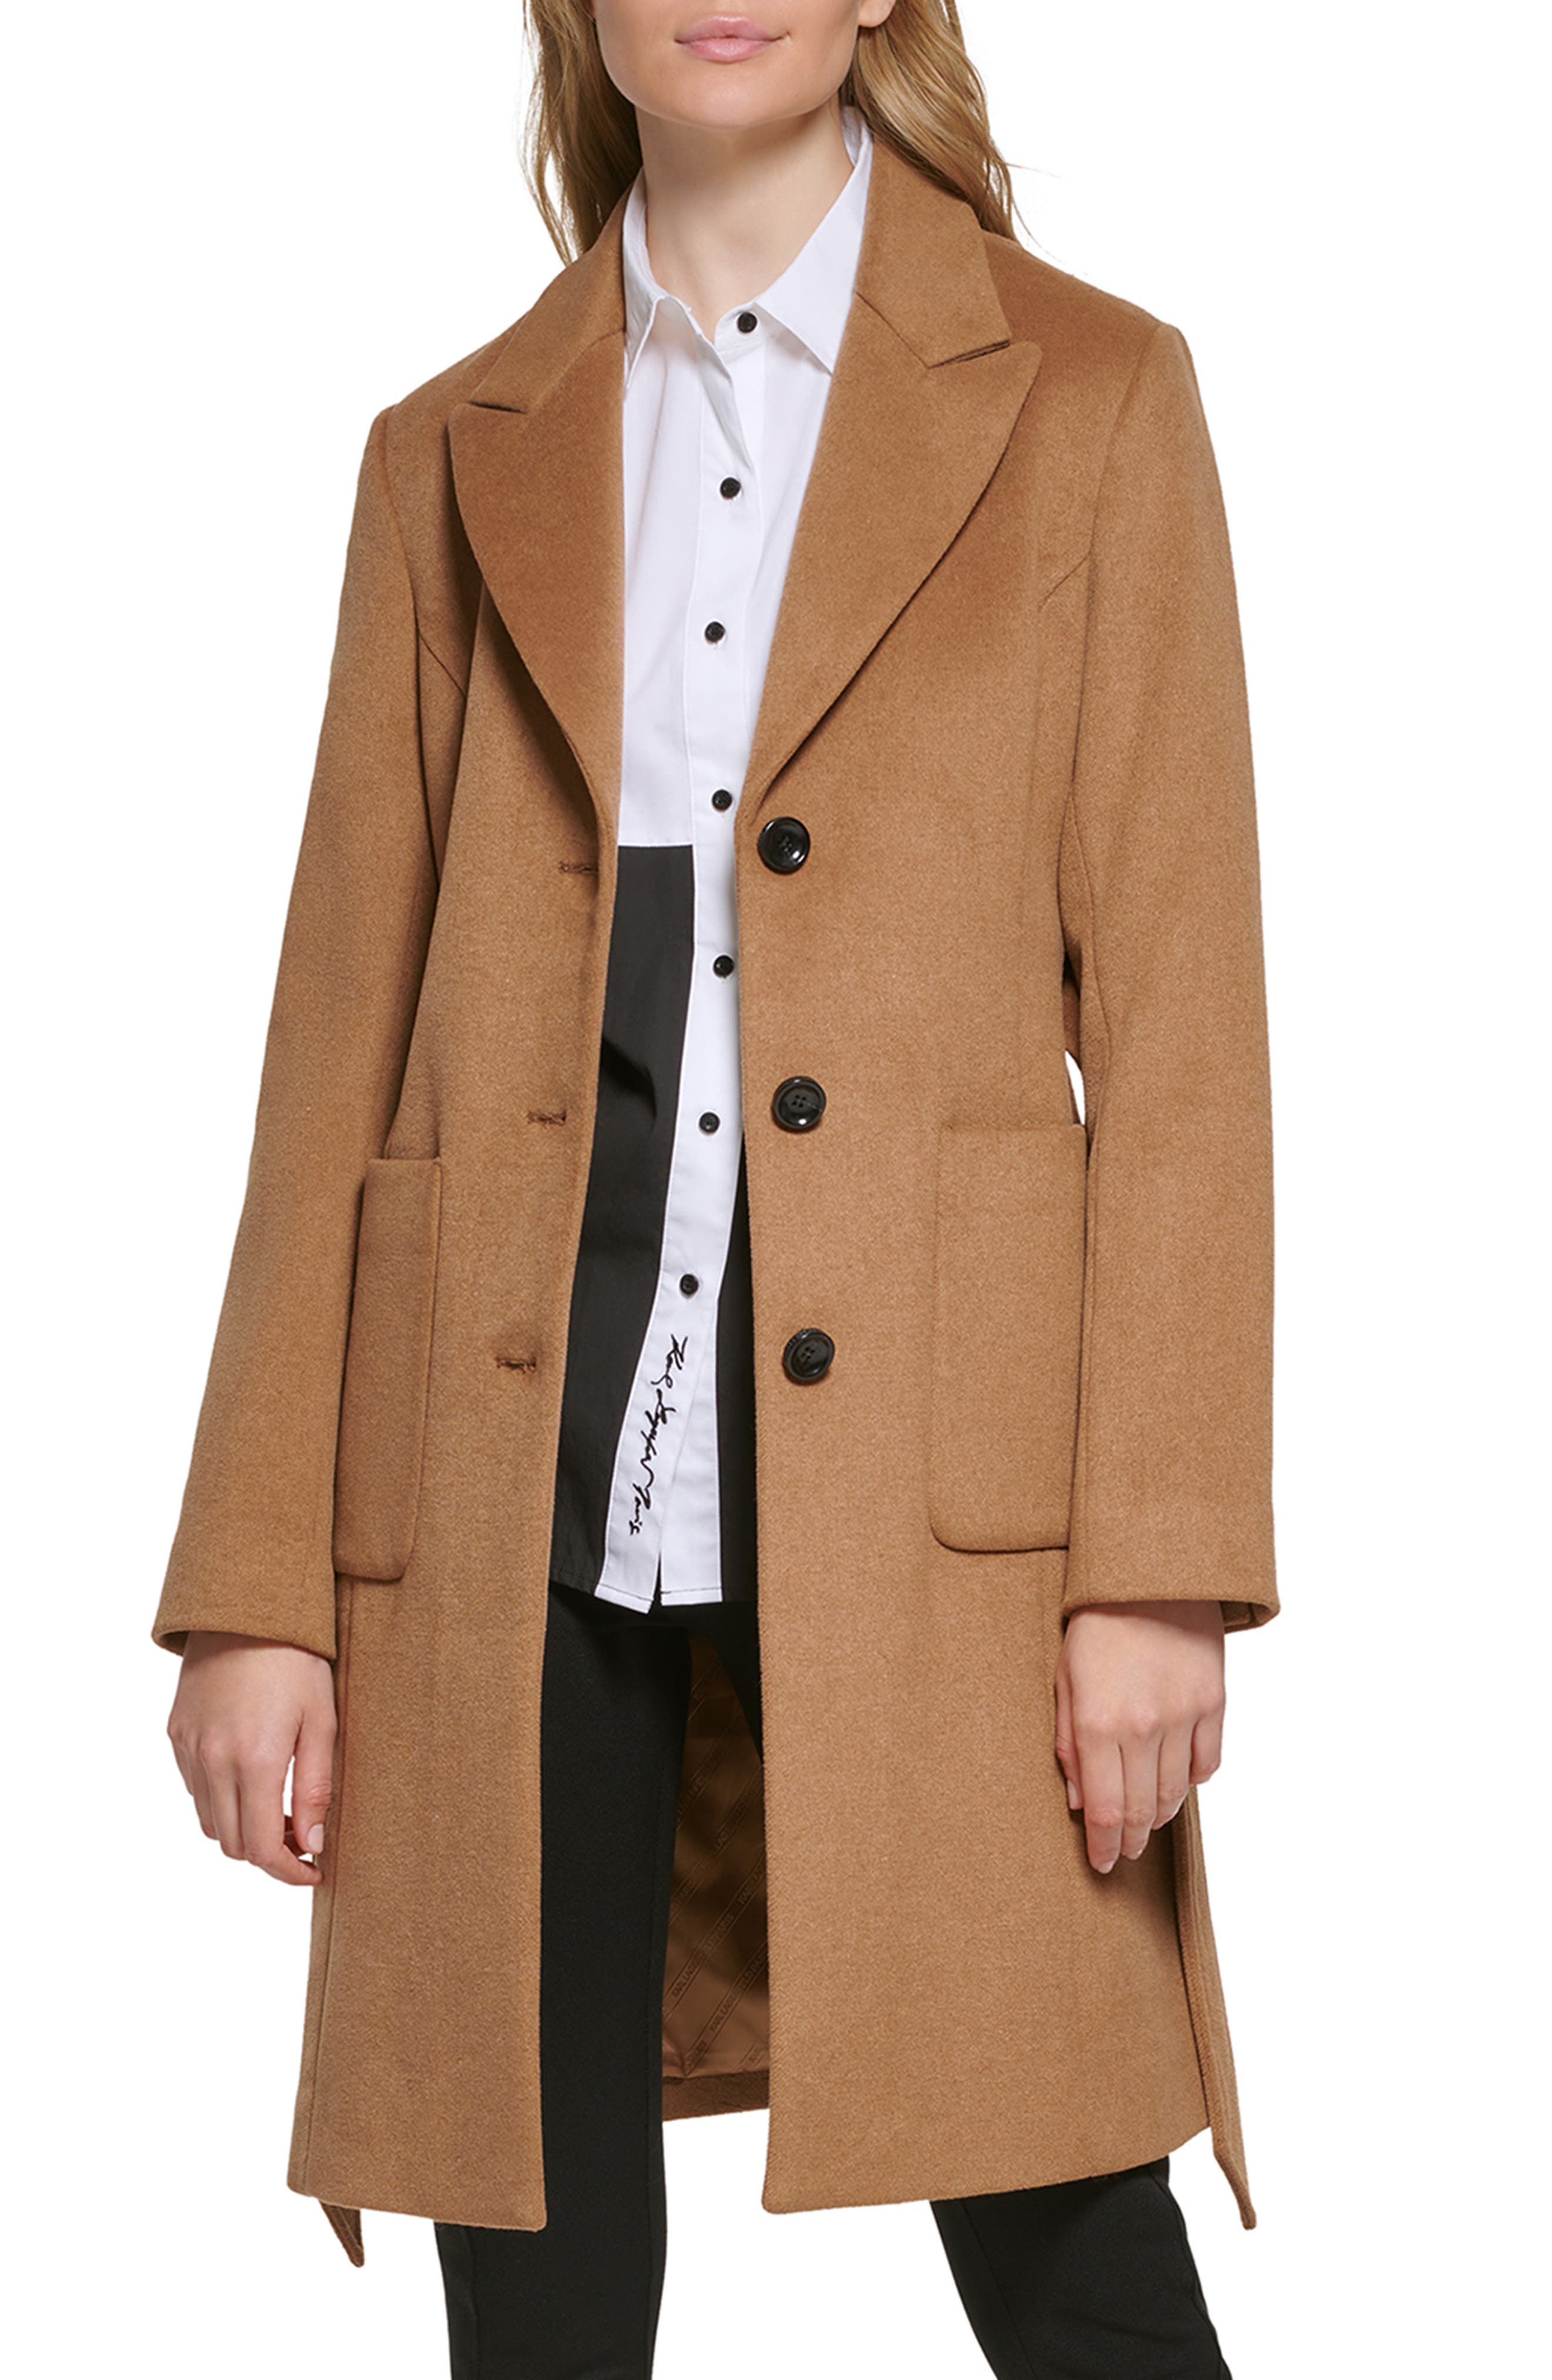 Boohoo Luxe Textured Wool Look Coat in Camel Womens Clothing Coats Long coats and winter coats Natural 